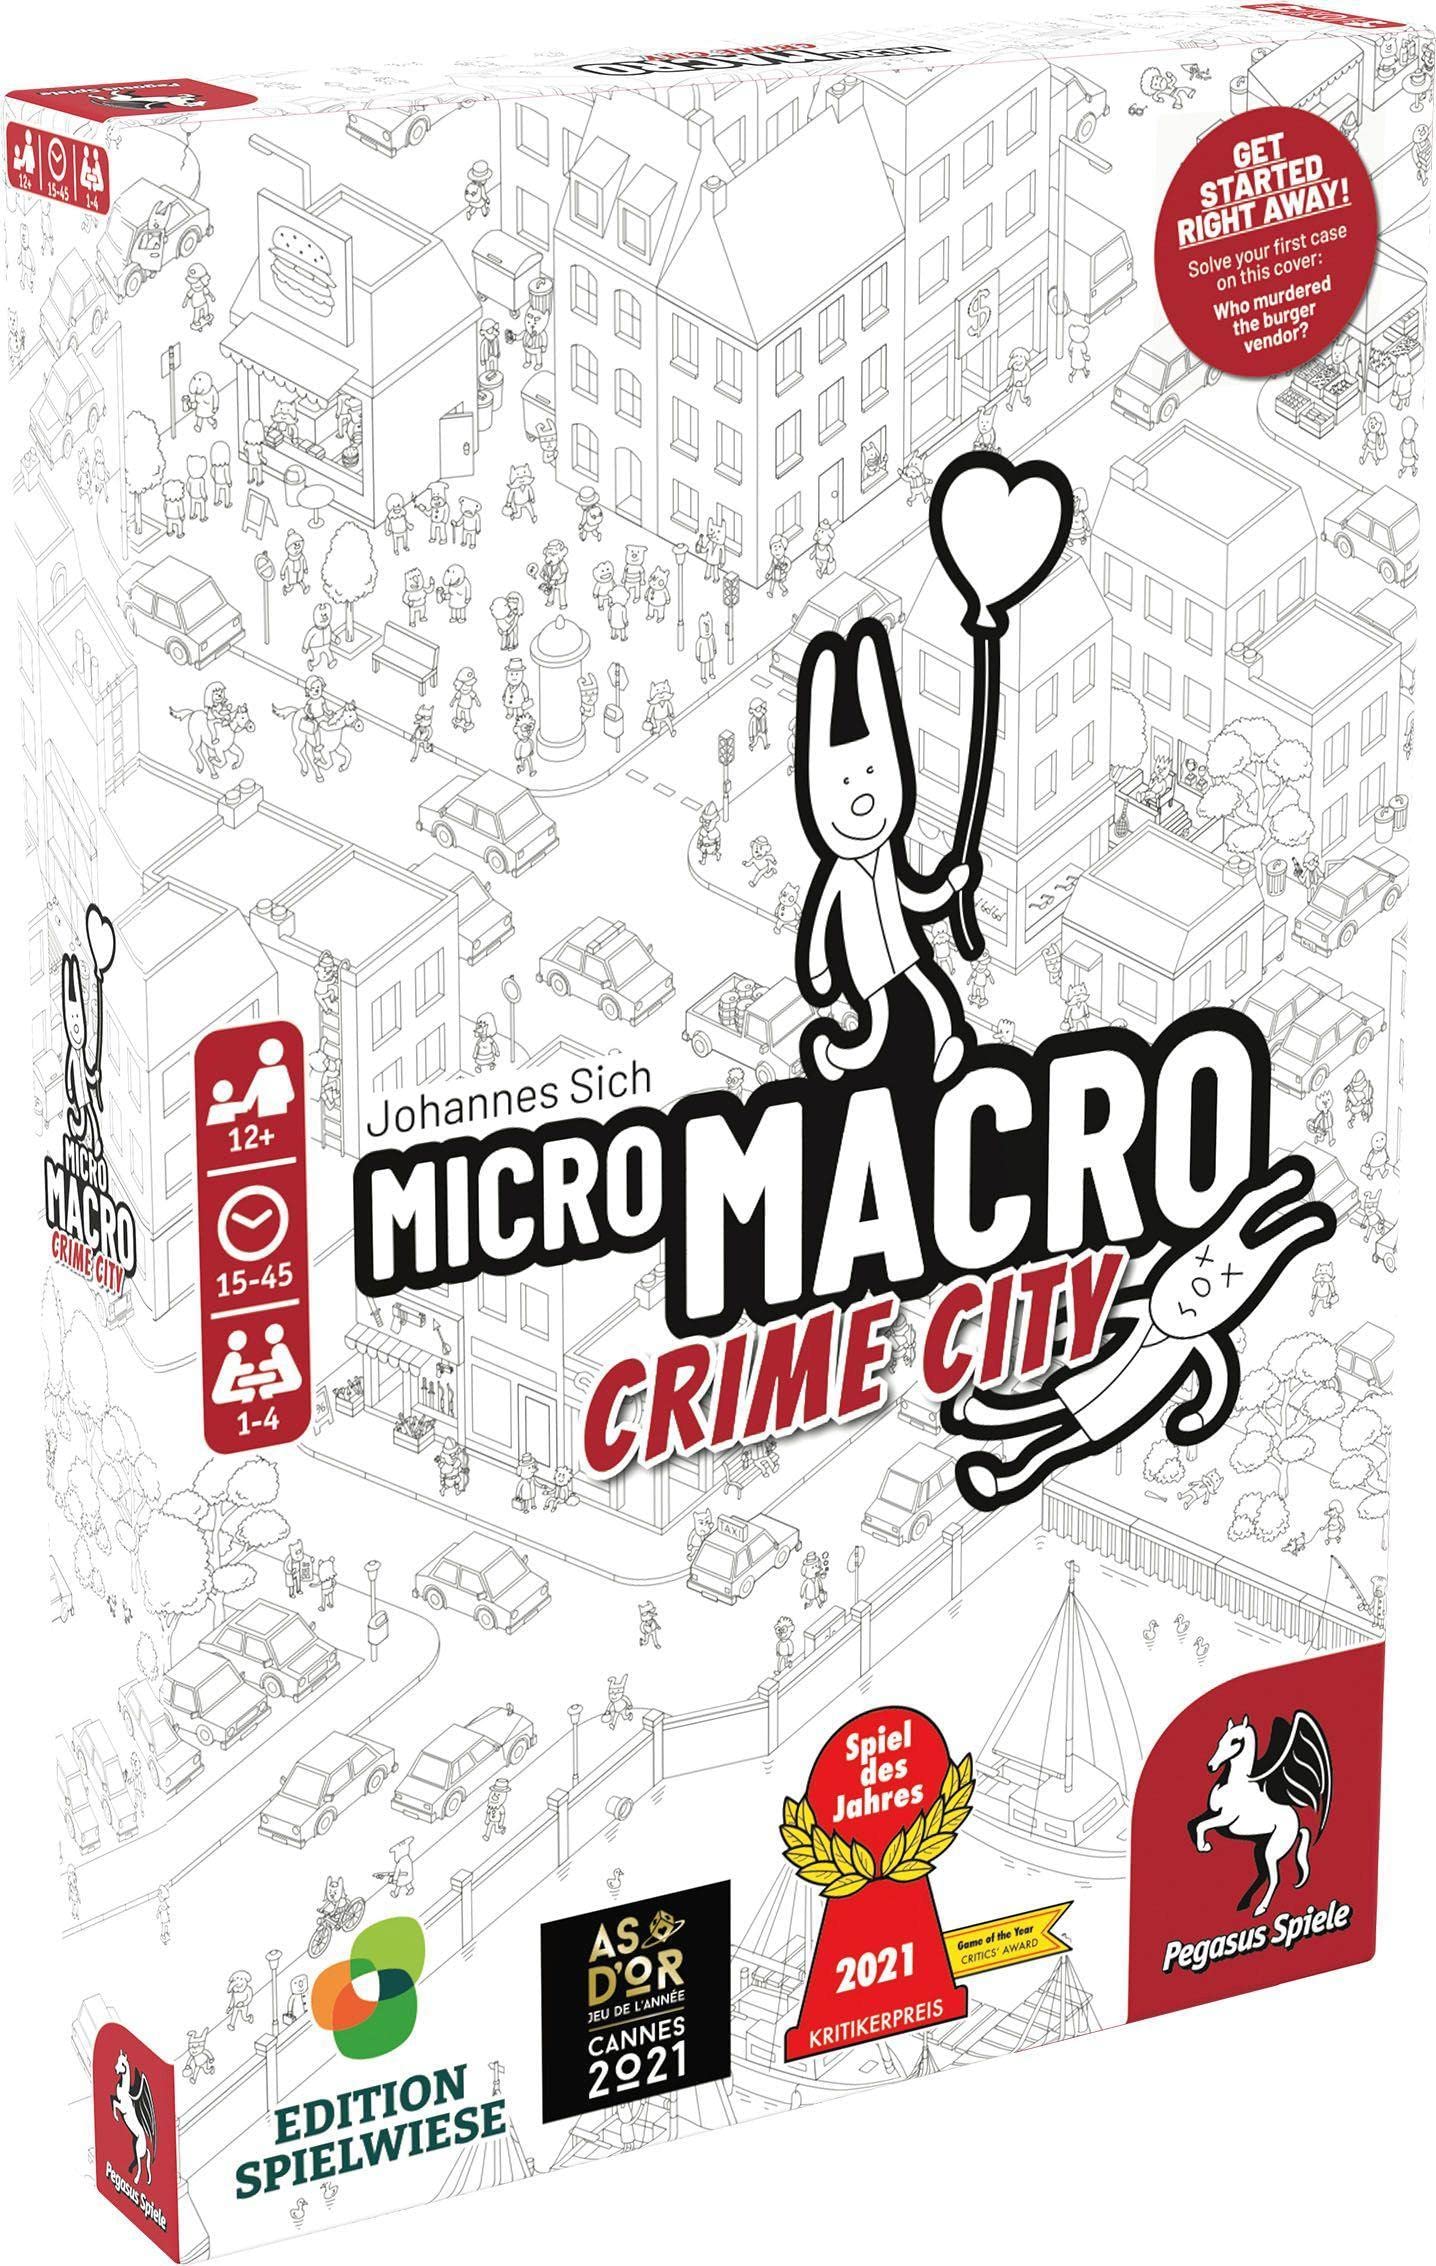 MicroMacro: Crime City - Board Game by Pegasus Spiele 1-4 Players – 15-45 Minutes of Gameplay – for Family Game Night – Kids and Adults Ages 12+ - English Version